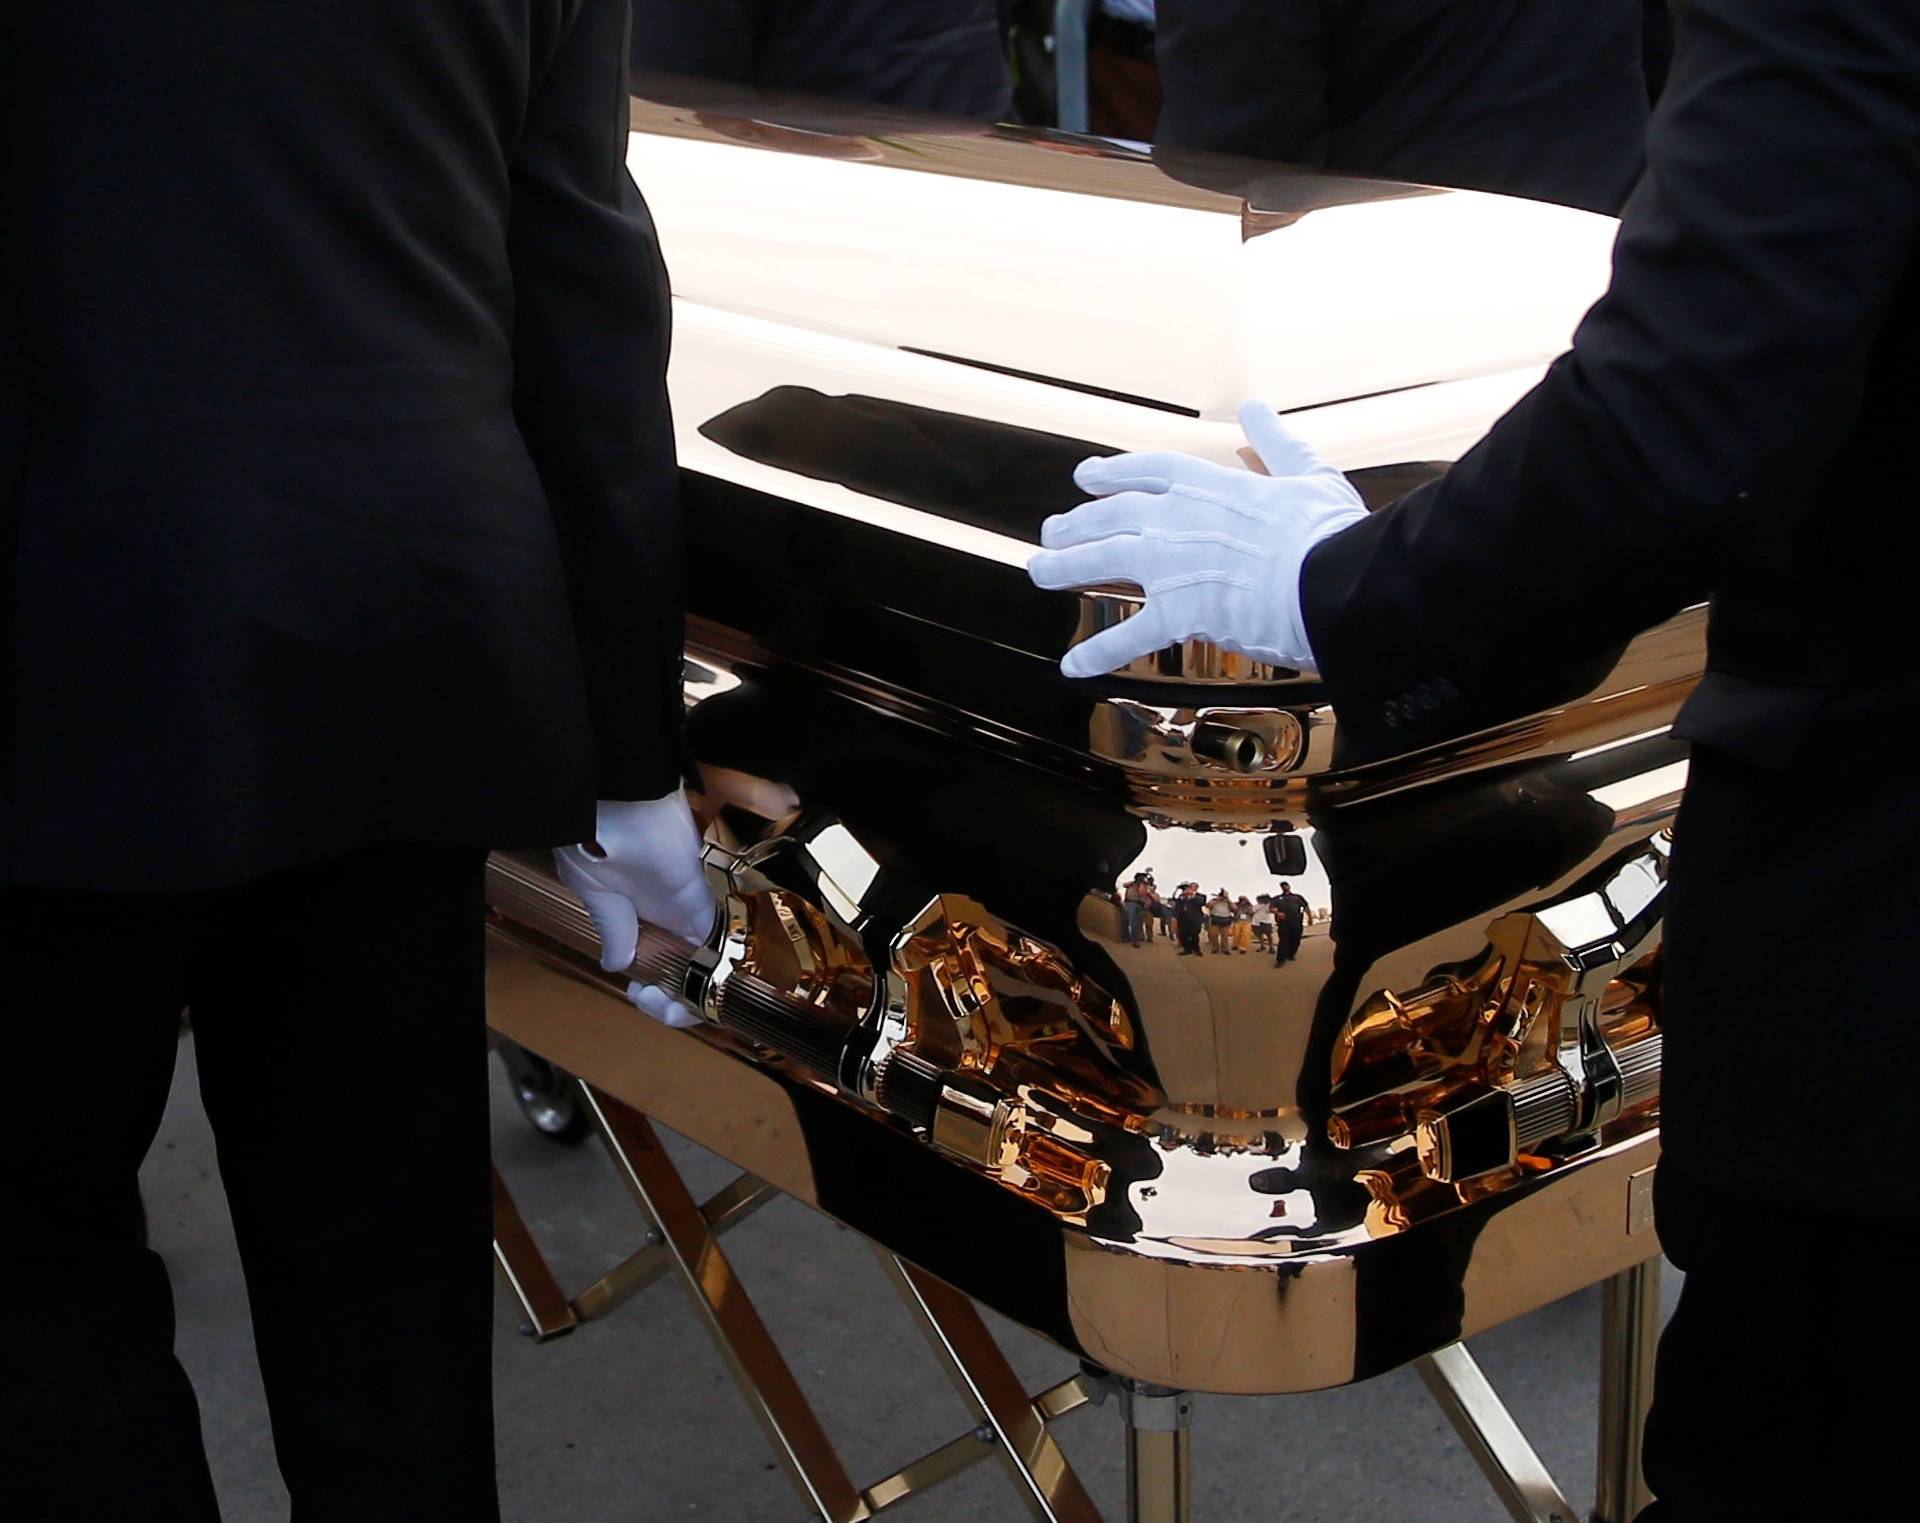 The casket carrying the late singer Aretha Franklin arrives at the Charles H. Wright Museum of African American History for two days of public viewing in Detroit